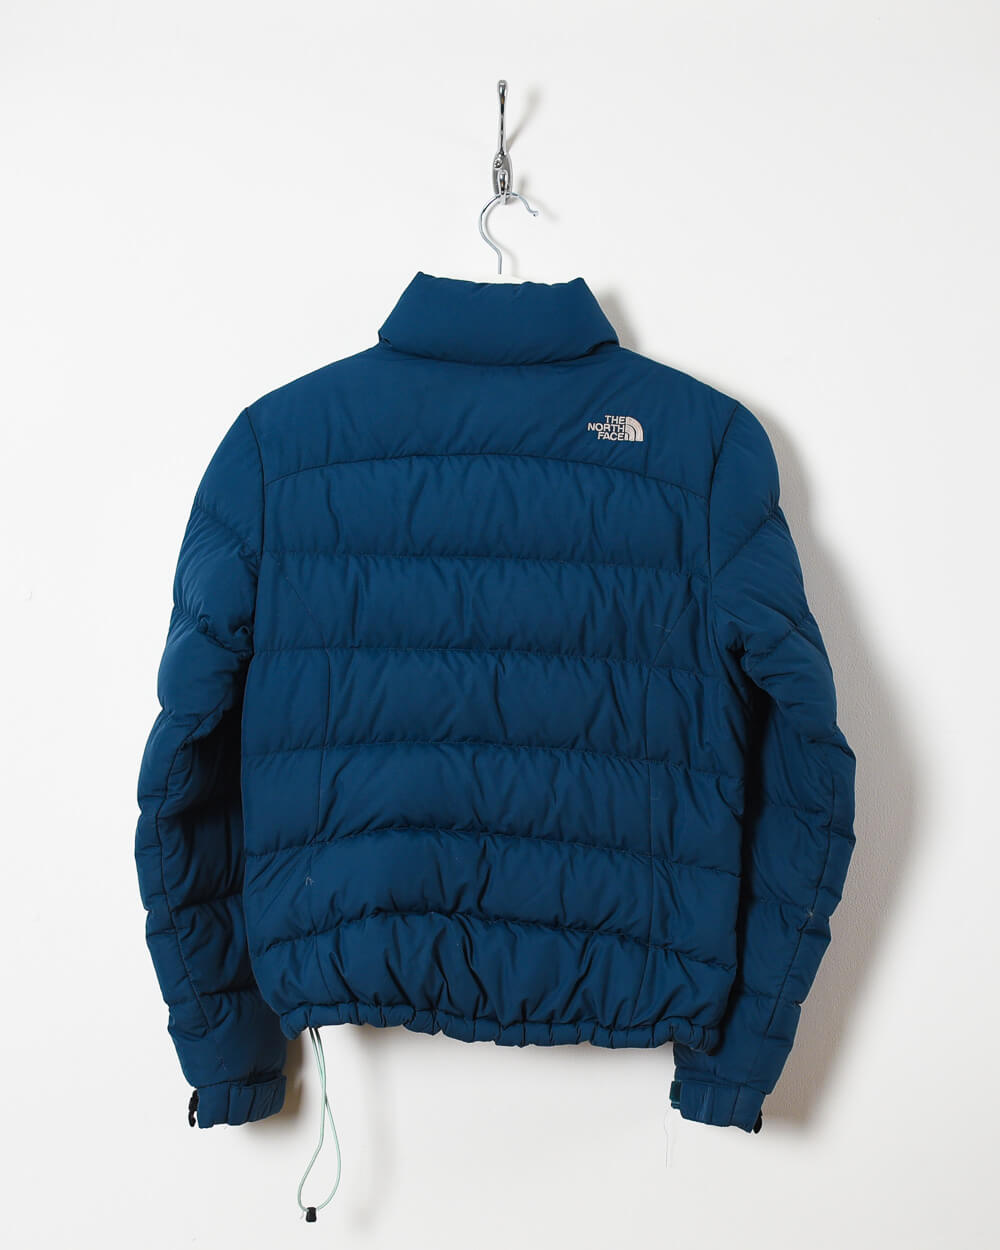 Blue The North Face Women's Puffer Jacket - X-Small 